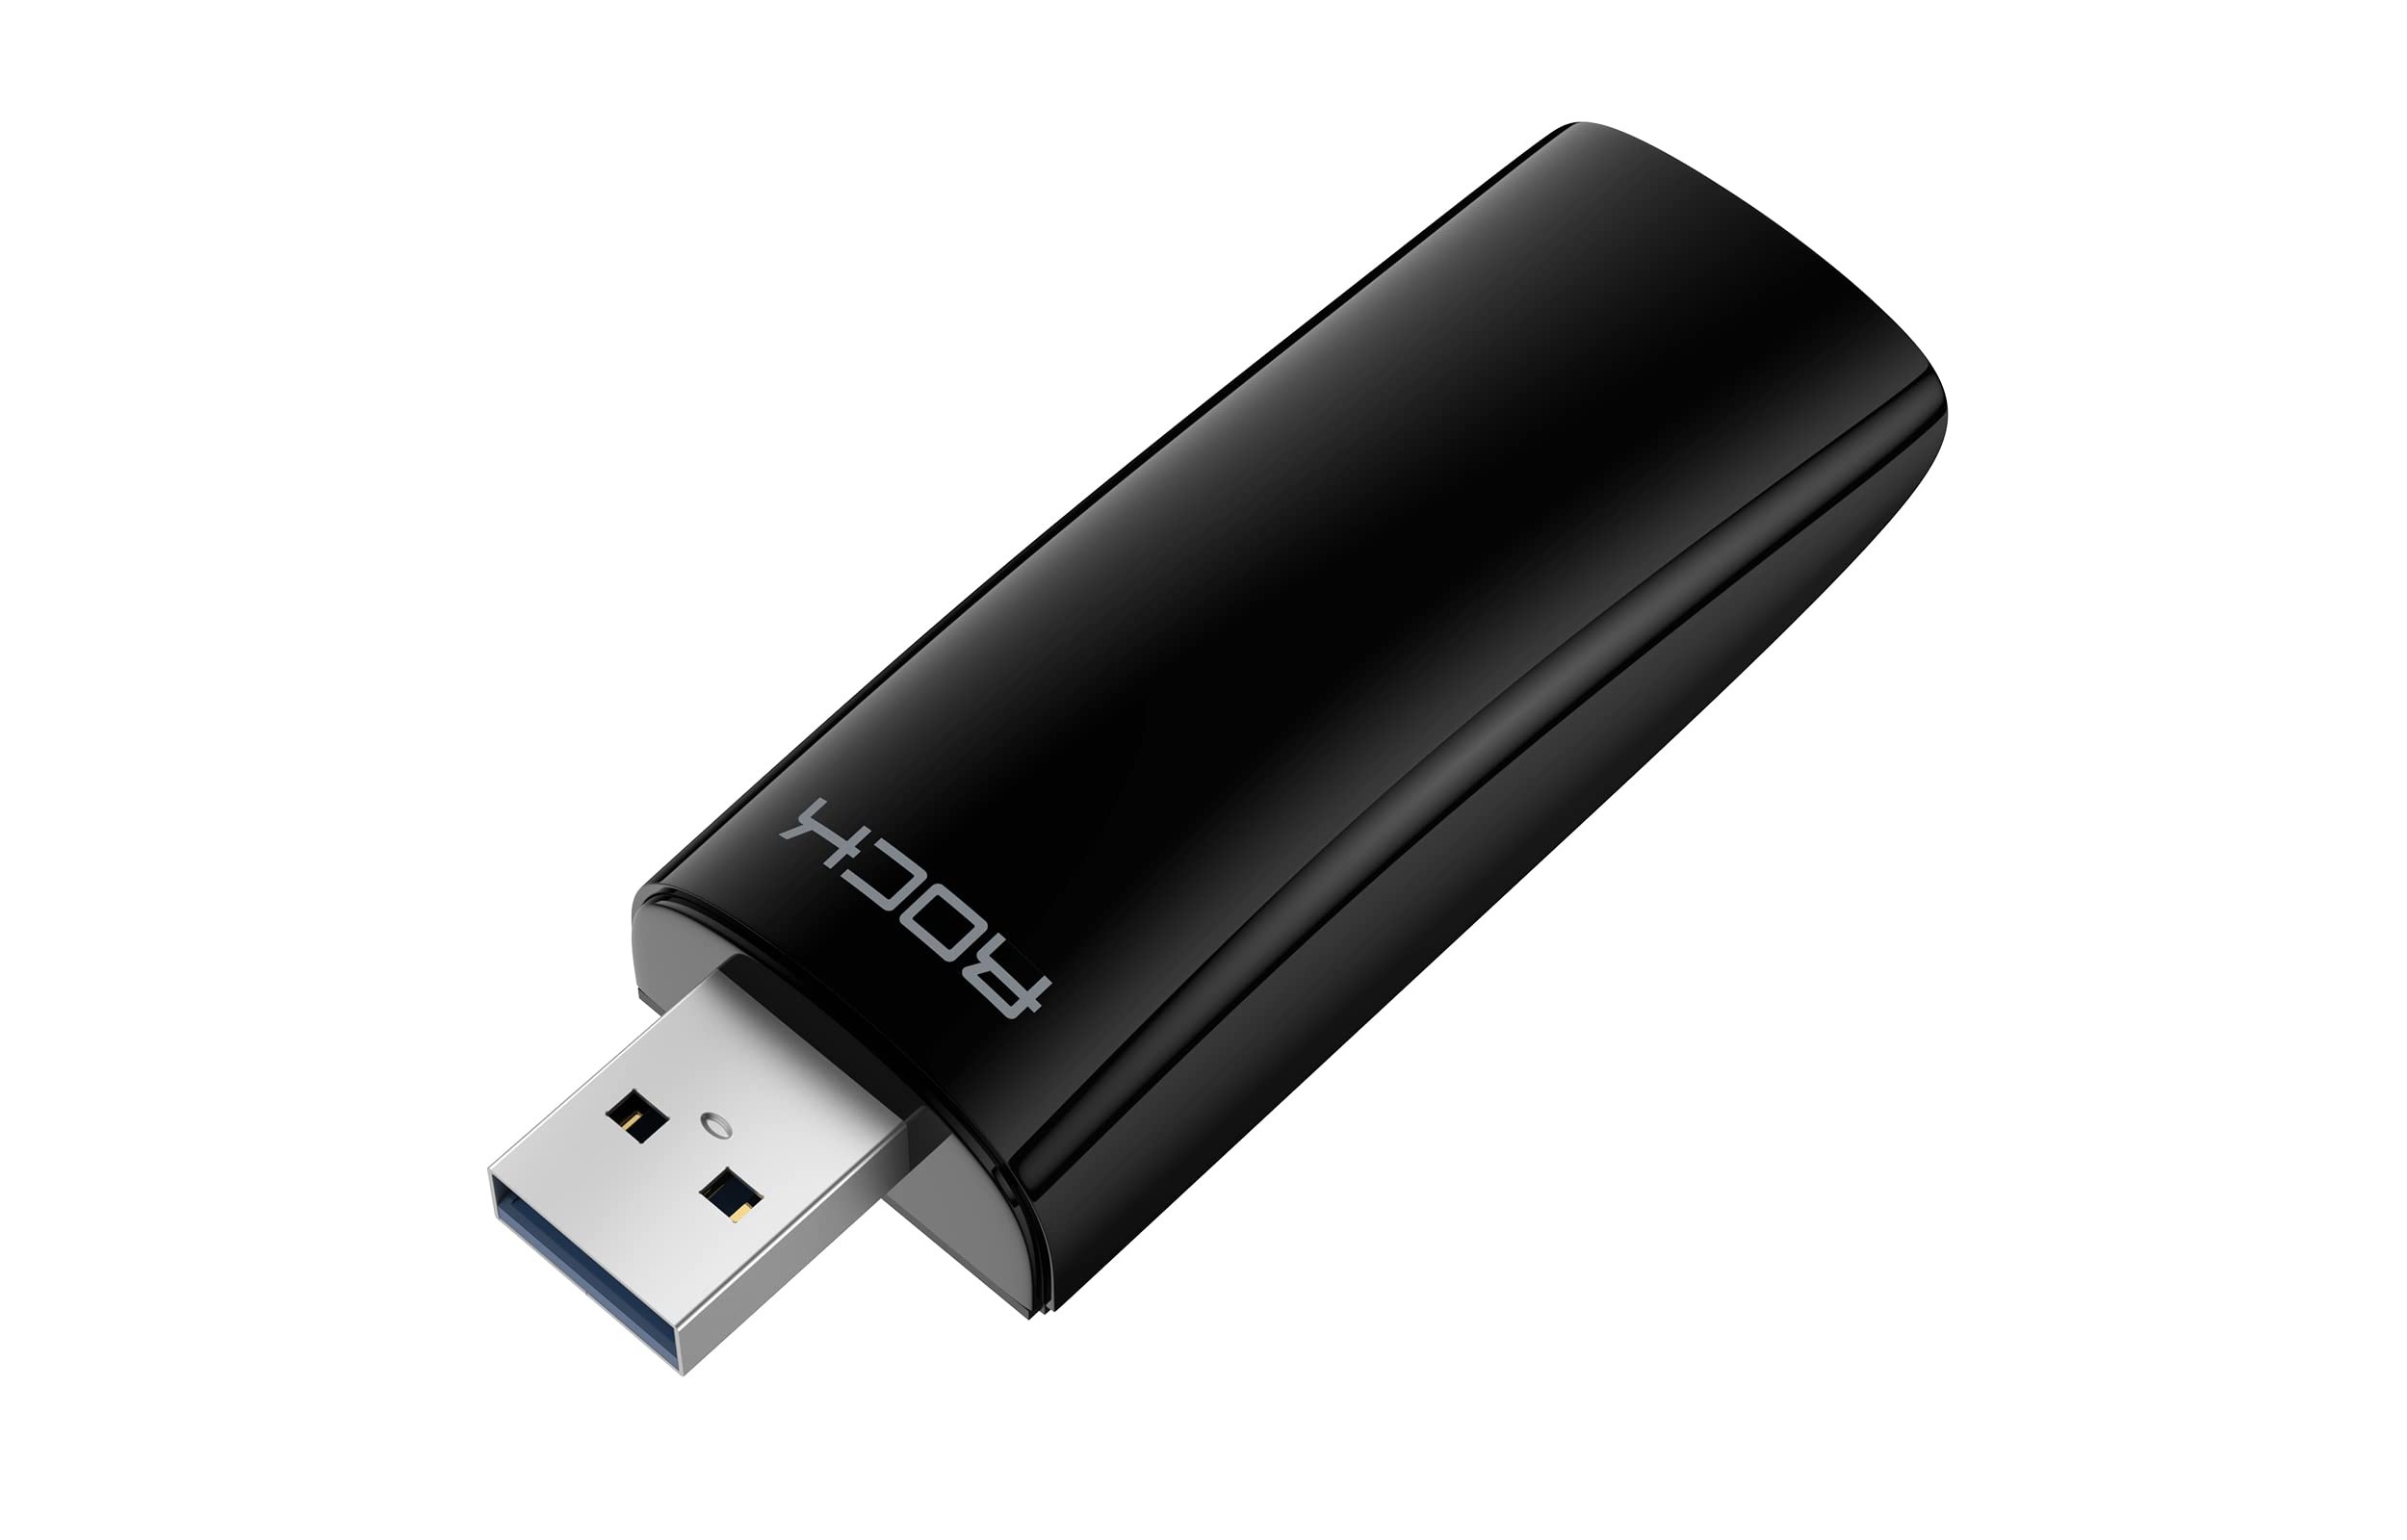 Virtualizing Your USB Dongle Key For Convenience